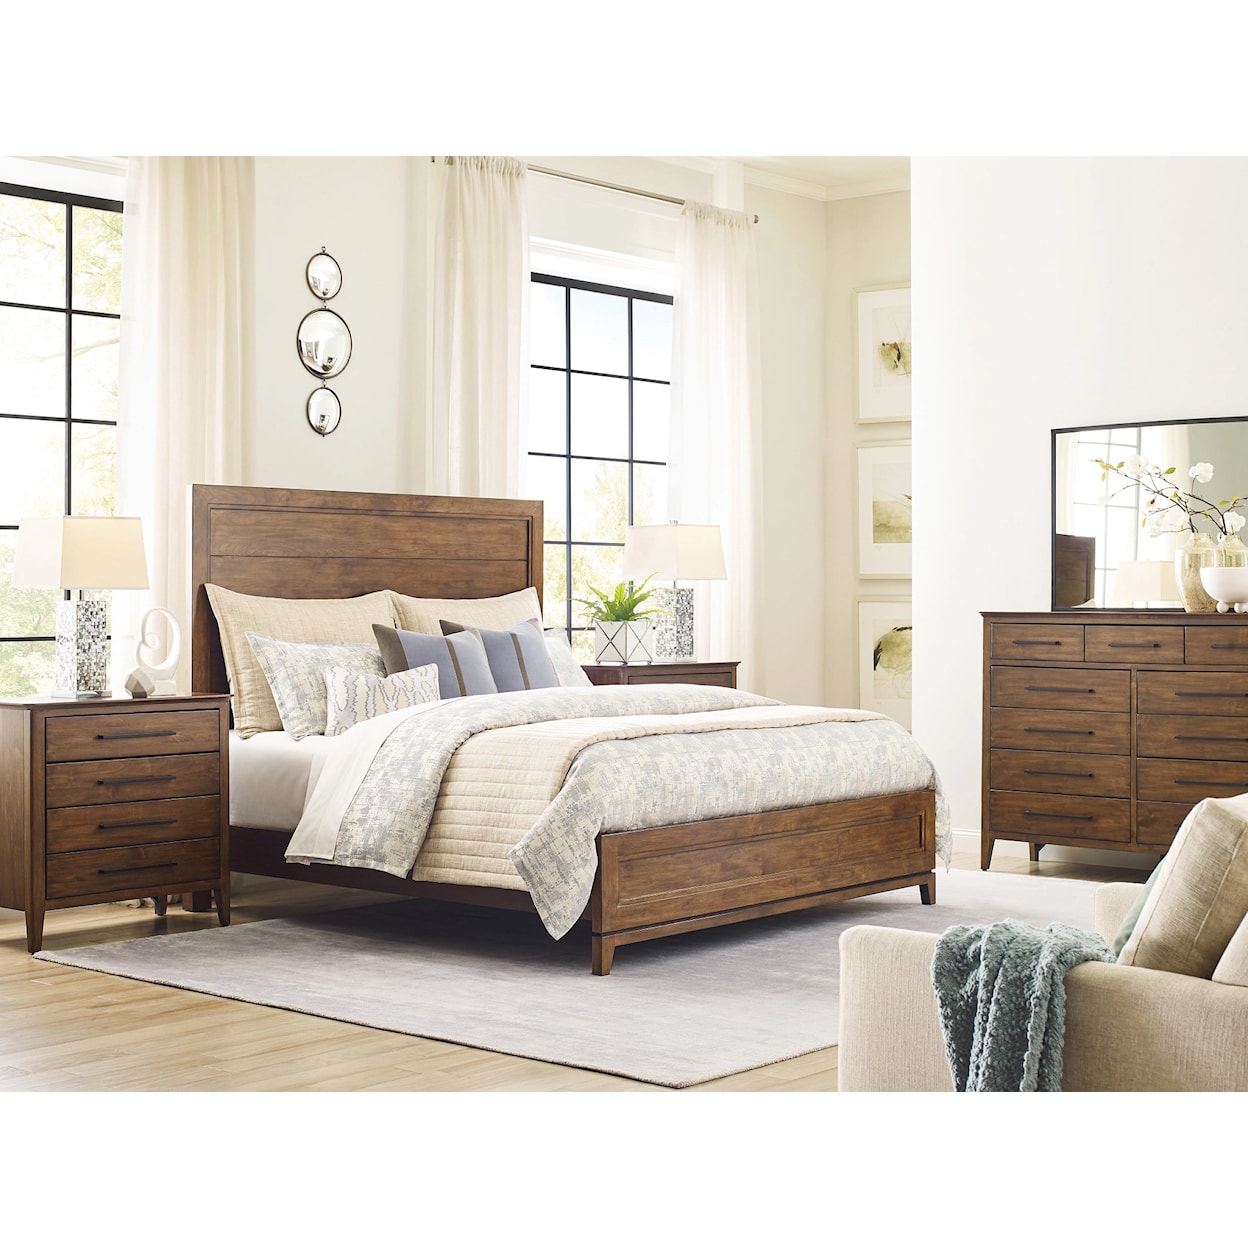 Kincaid Furniture Abode Schafer Cal King Panel Bed Complete